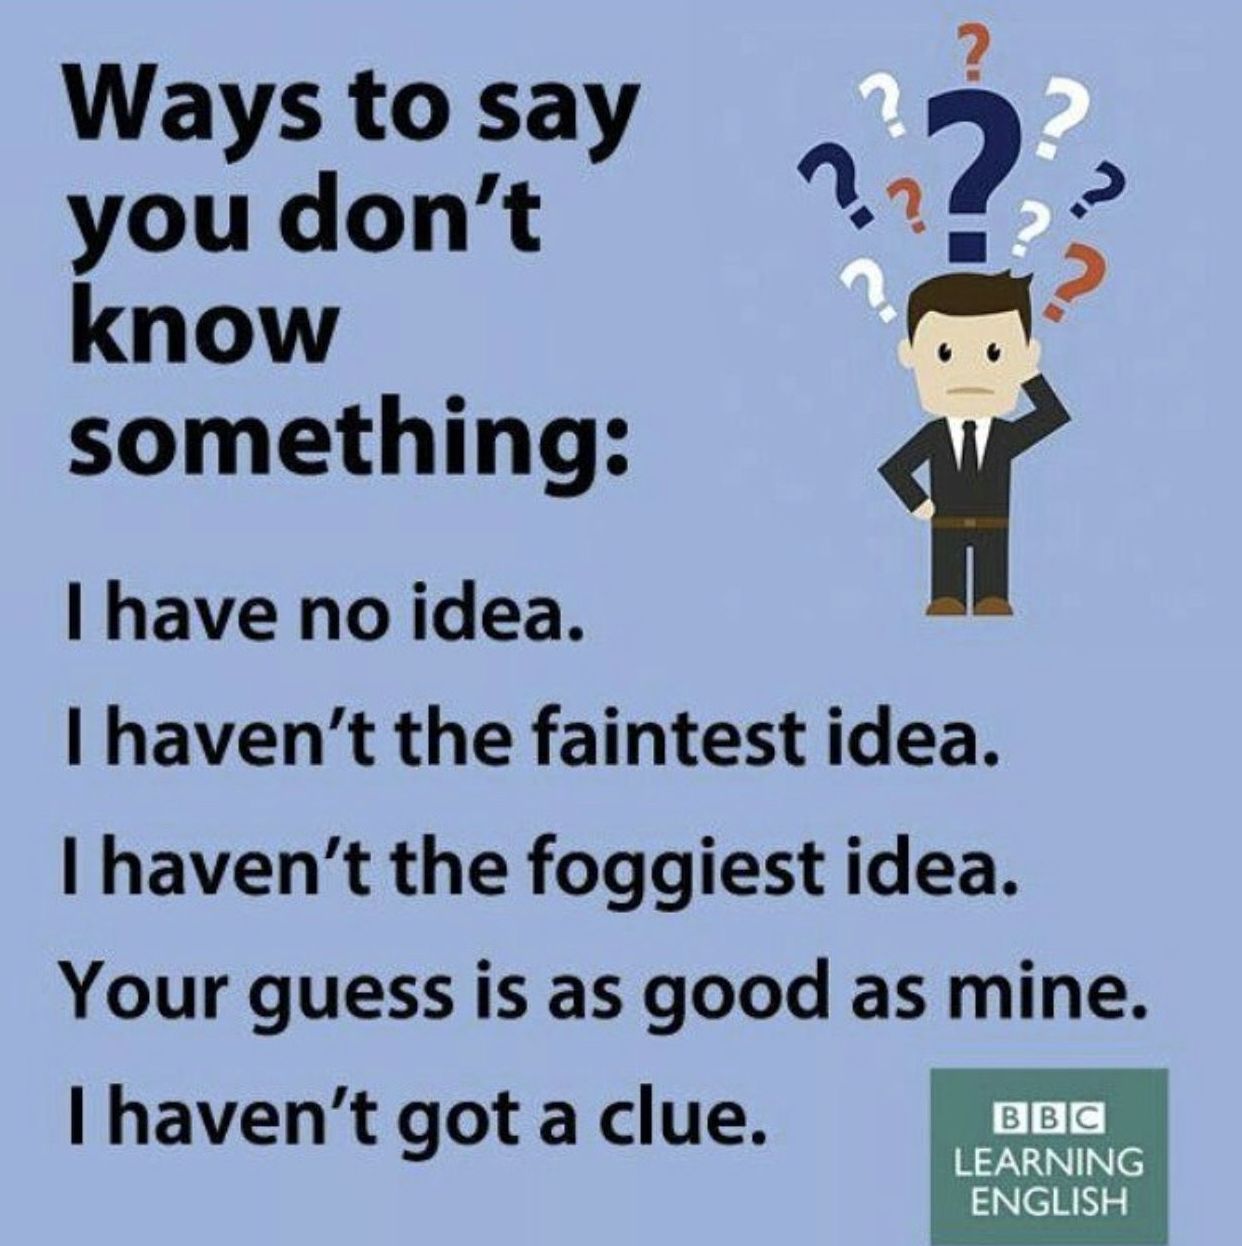 Ways to say you don' t know something